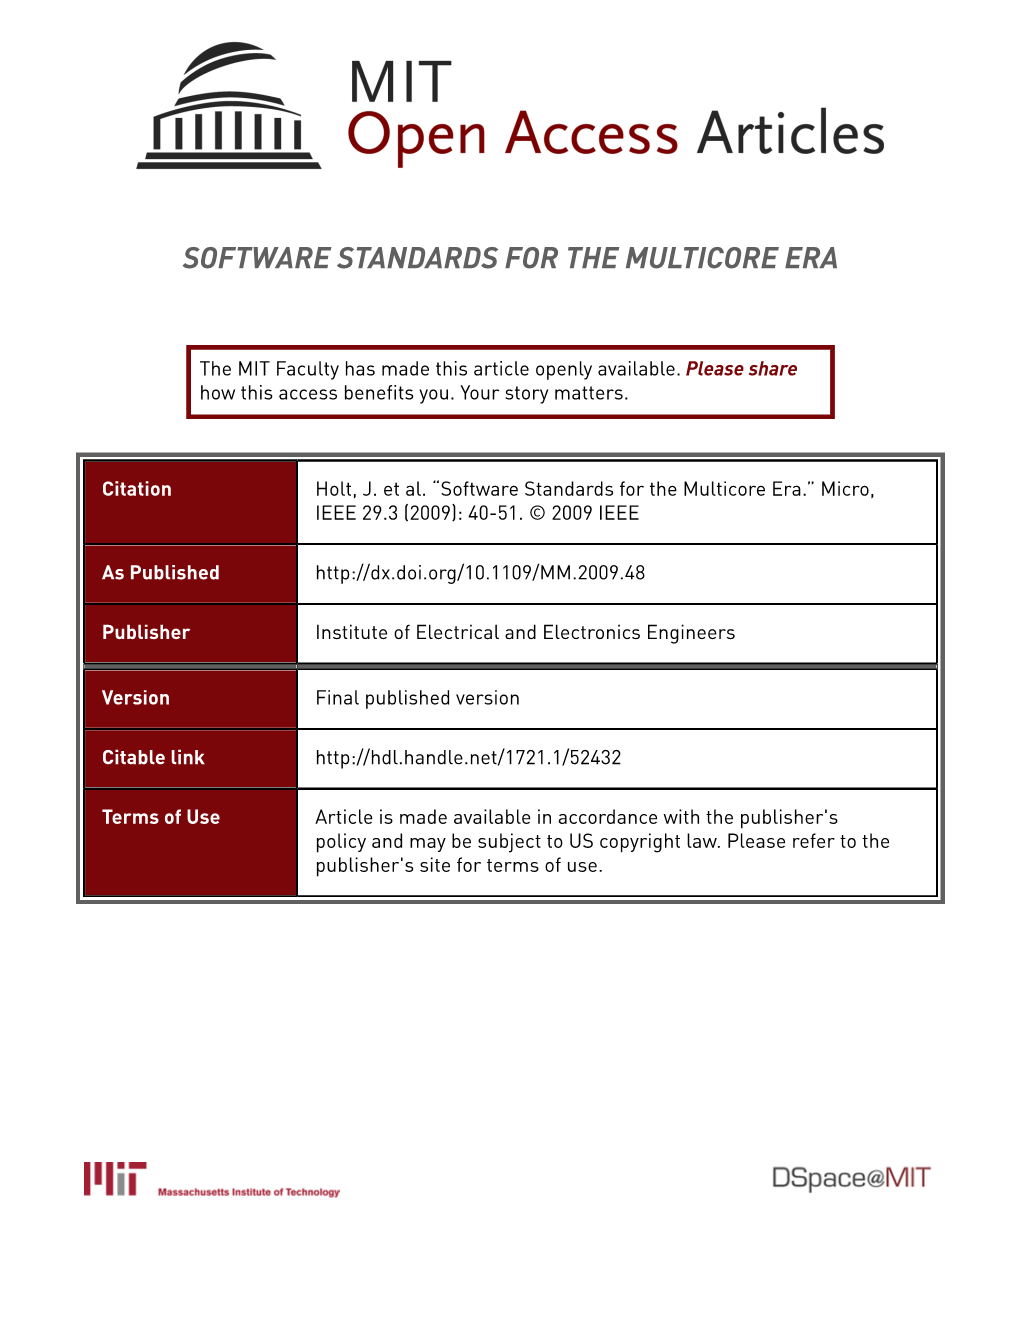 Software Standards for the Multicore Era